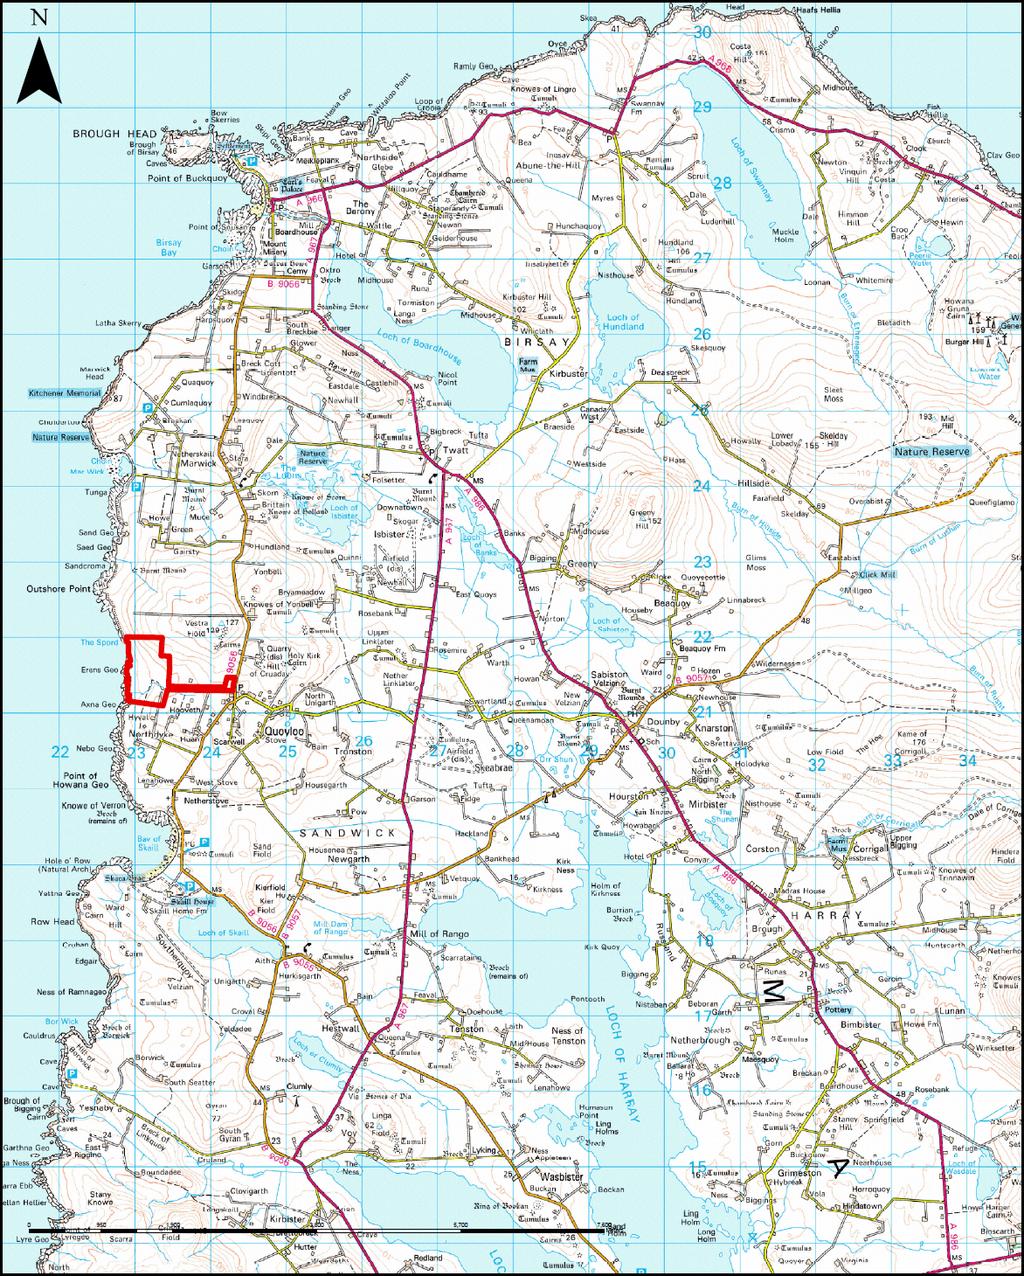 BAY OF SKAILL SUBSTATION - ORKNEY CAITHNESS CONNECTION Bay of Skaill - Substation Site Proposed Bay of Skaill substation site location The proposed Bay of Skaill Substation site is located in a